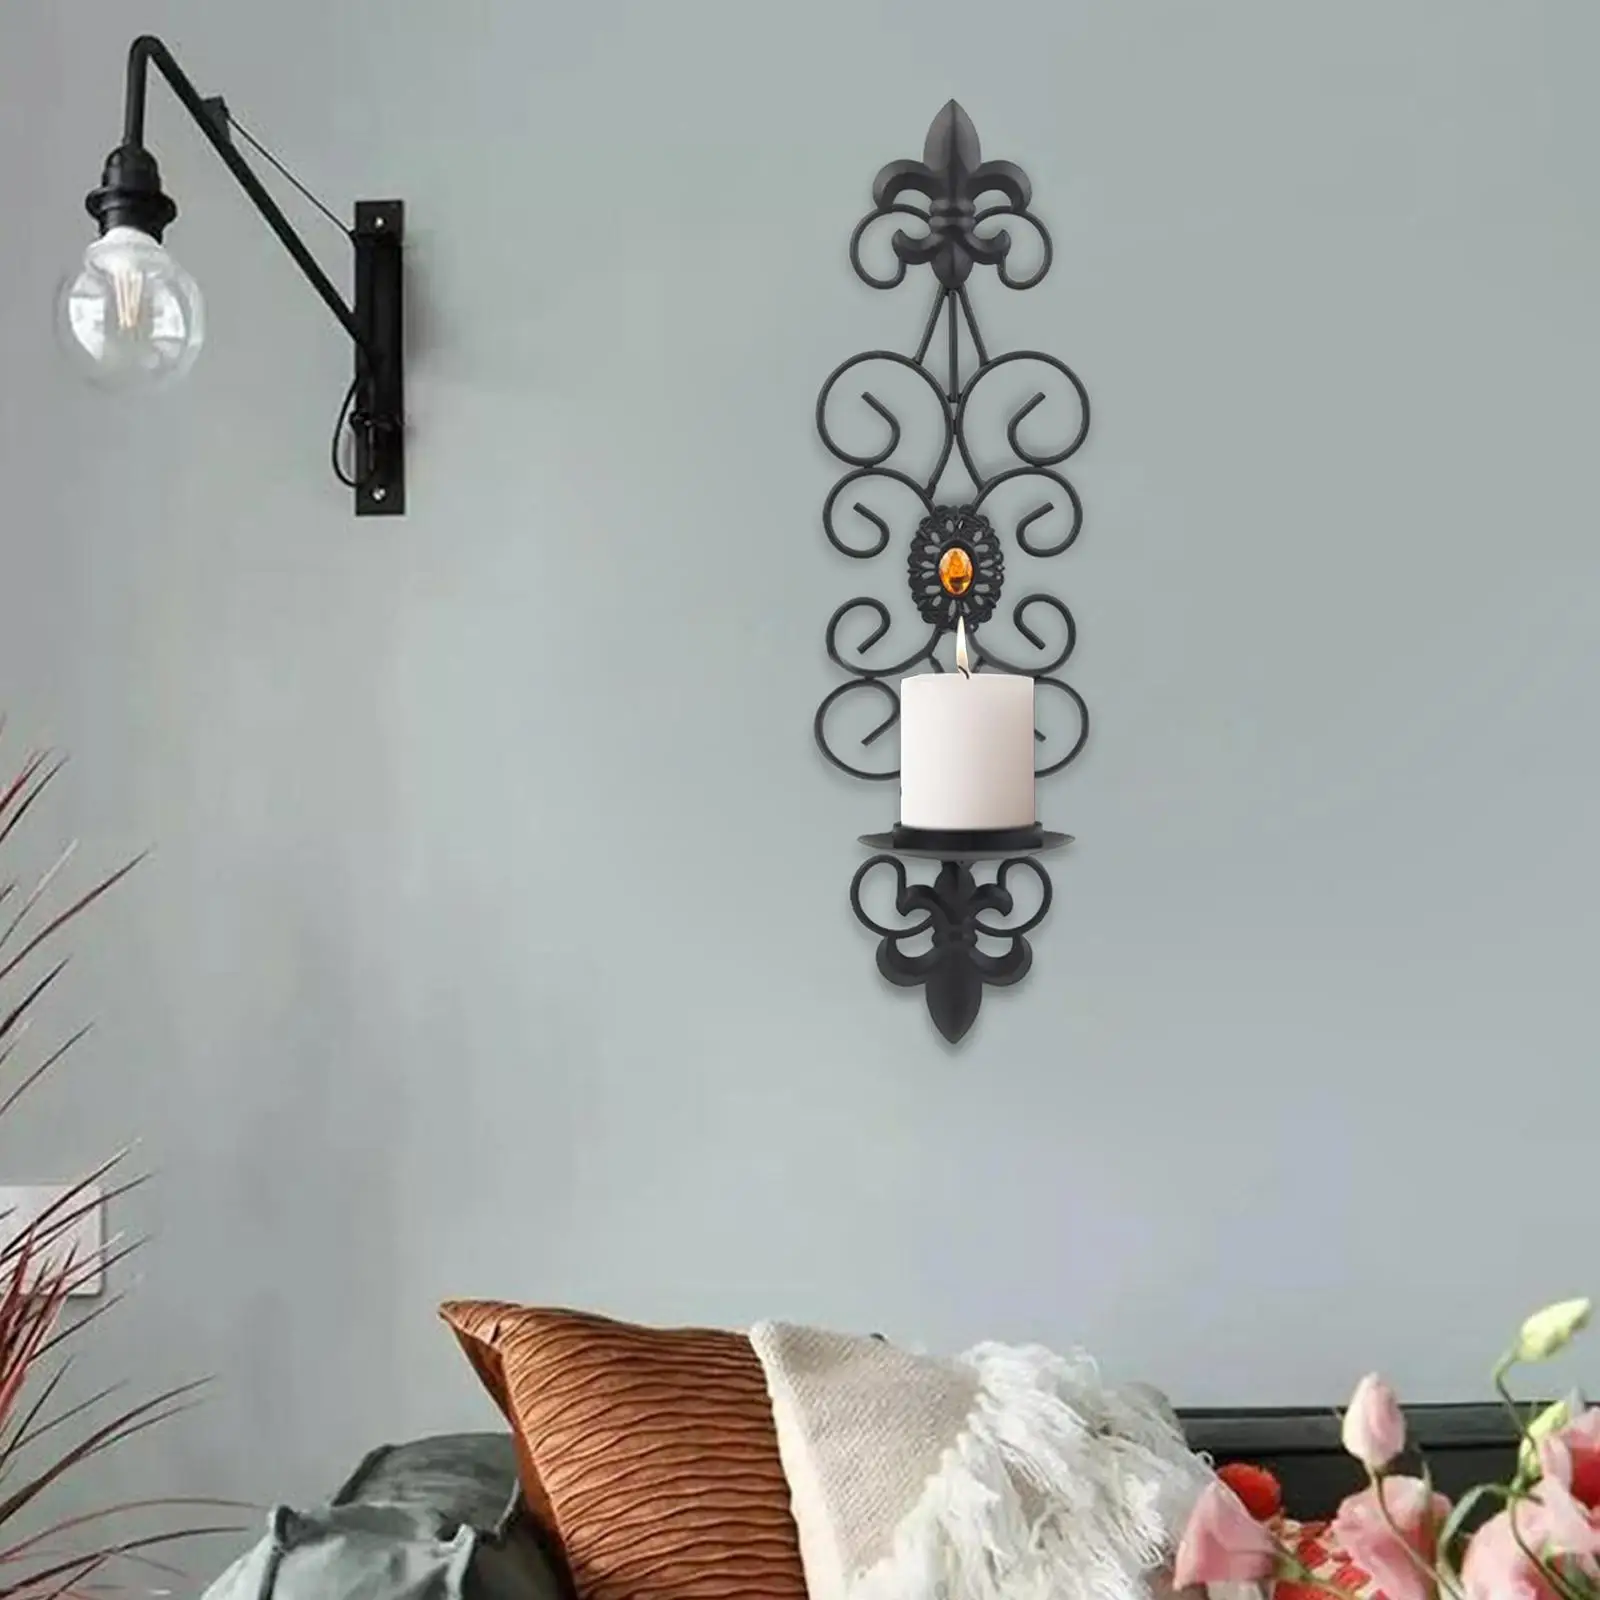 Hanging Tealight Candle Holders Wall Hanging Sculpture Antique Candlestick Stand Pillar Candle Holder for Living Room Home Decor